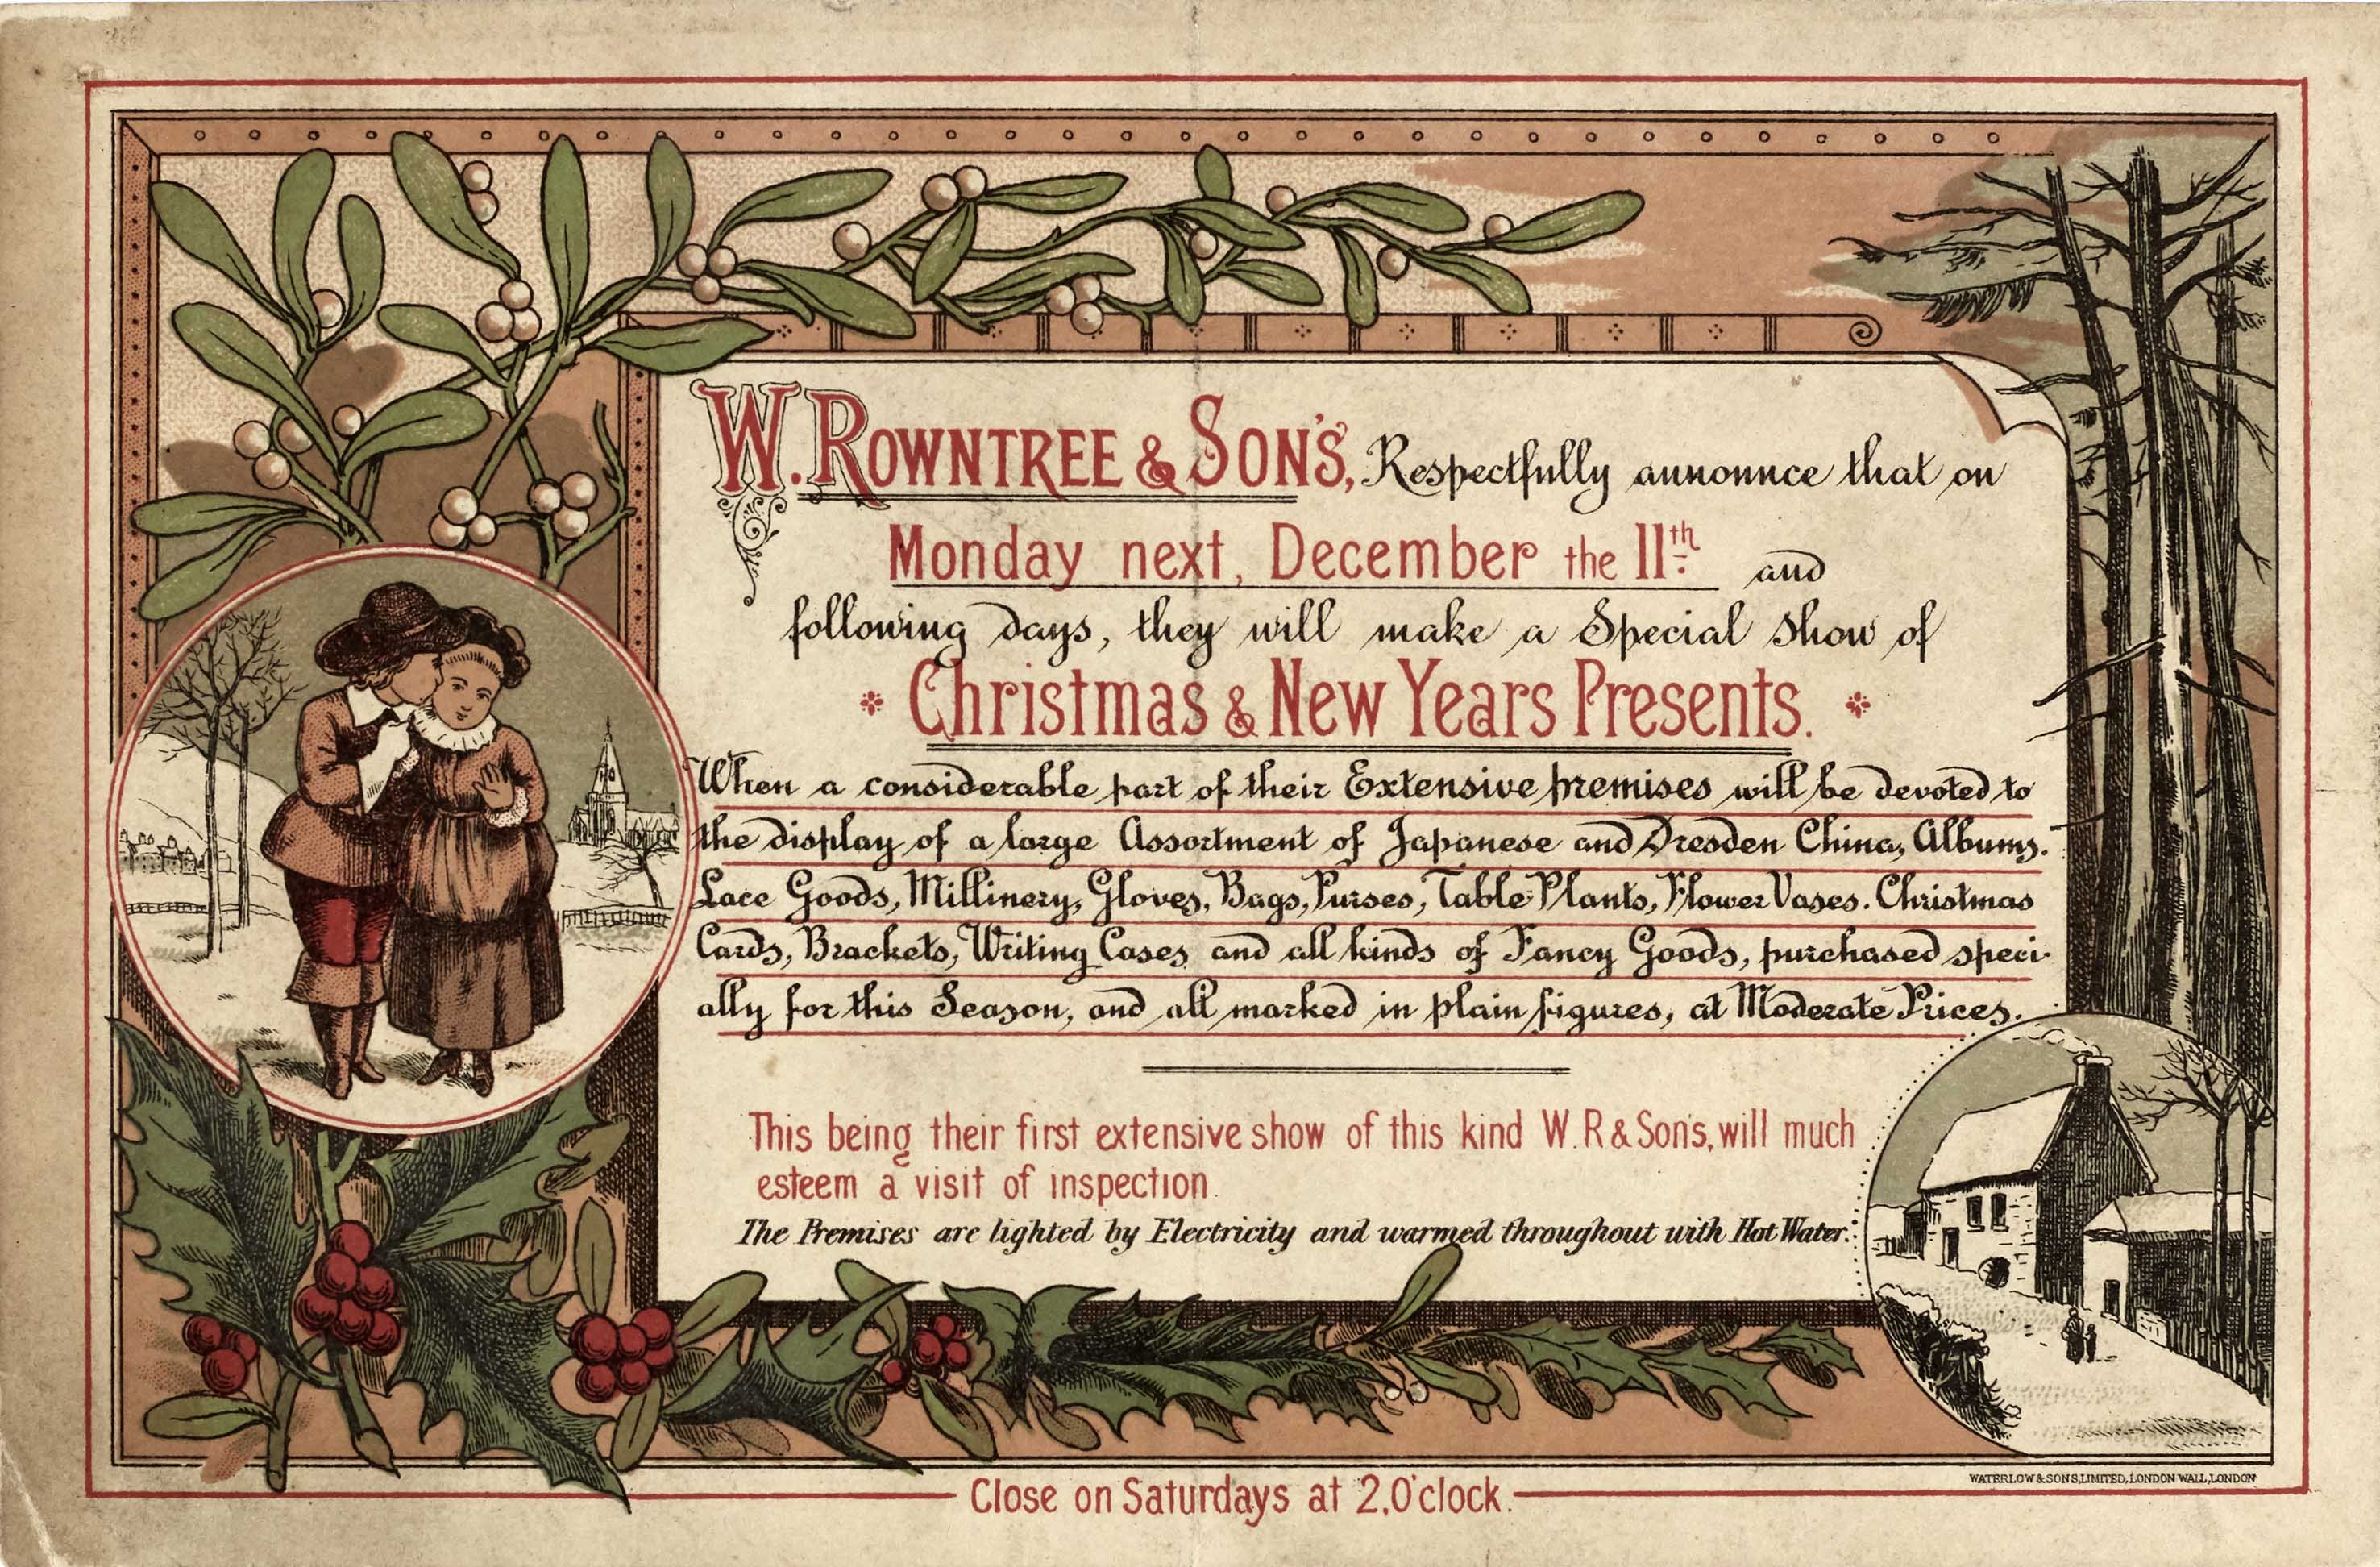 A Christmas circular from W Rowntree & Sons of Scarborough from 1882, promoting “their first extensive show of this kind” for which they would “much esteem a visit of inspection”.